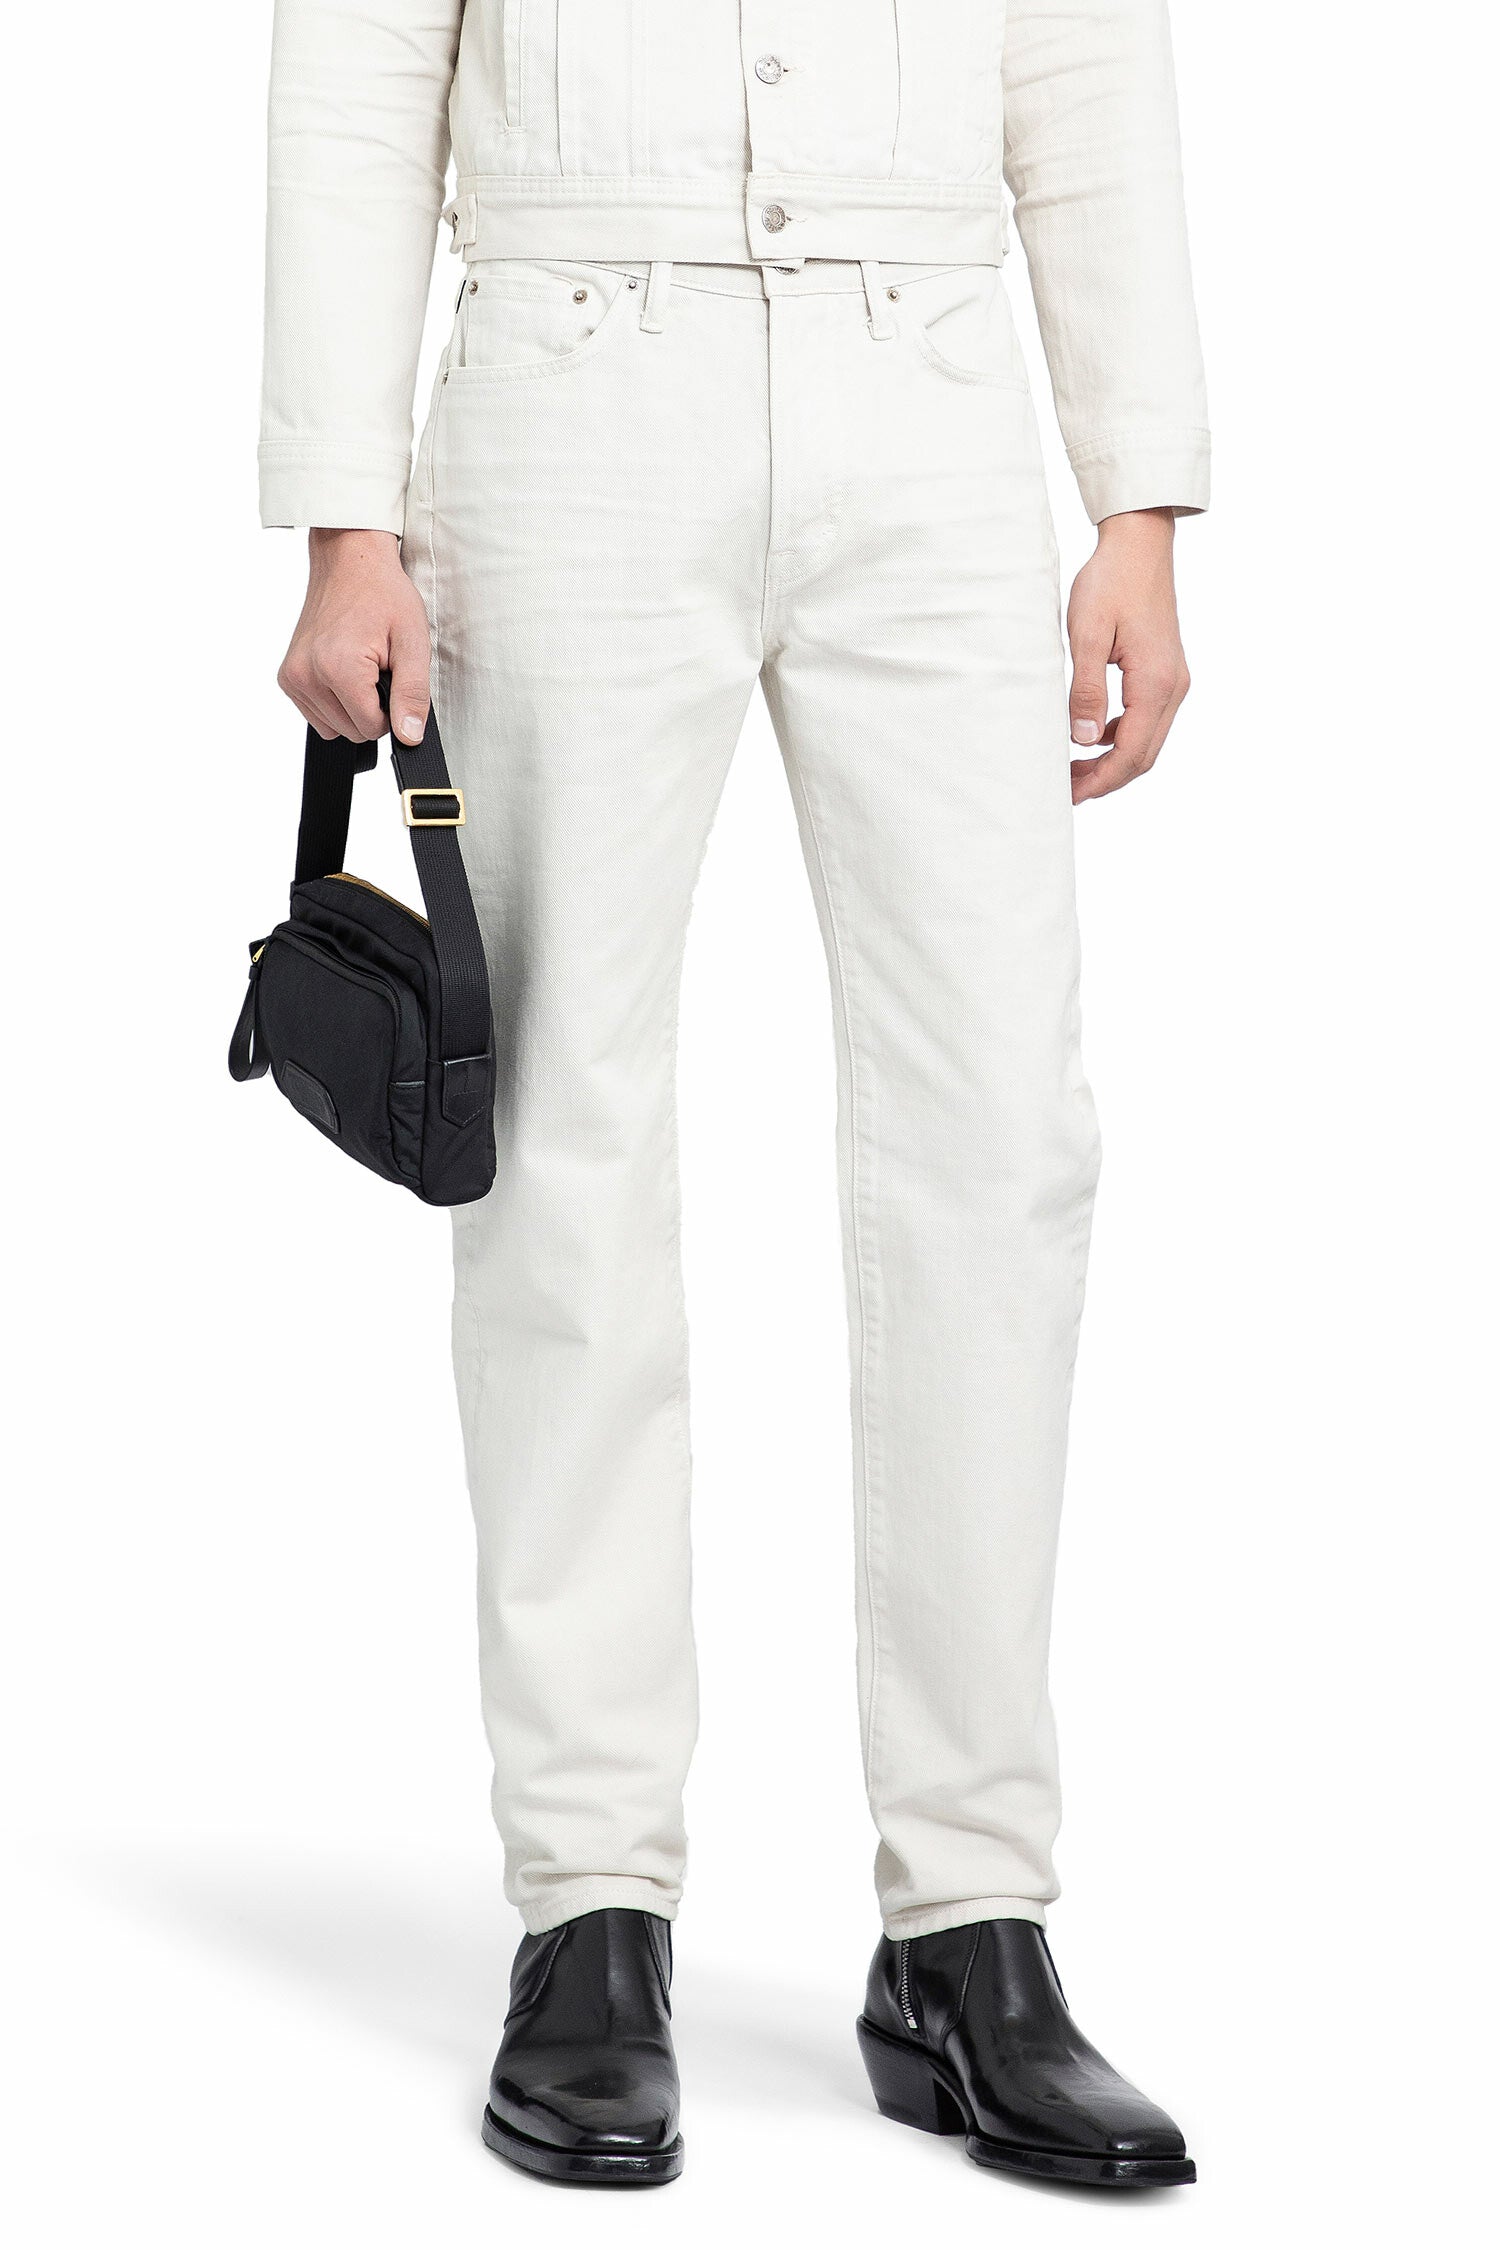 TOM FORD MAN OFF-WHITE JEANS